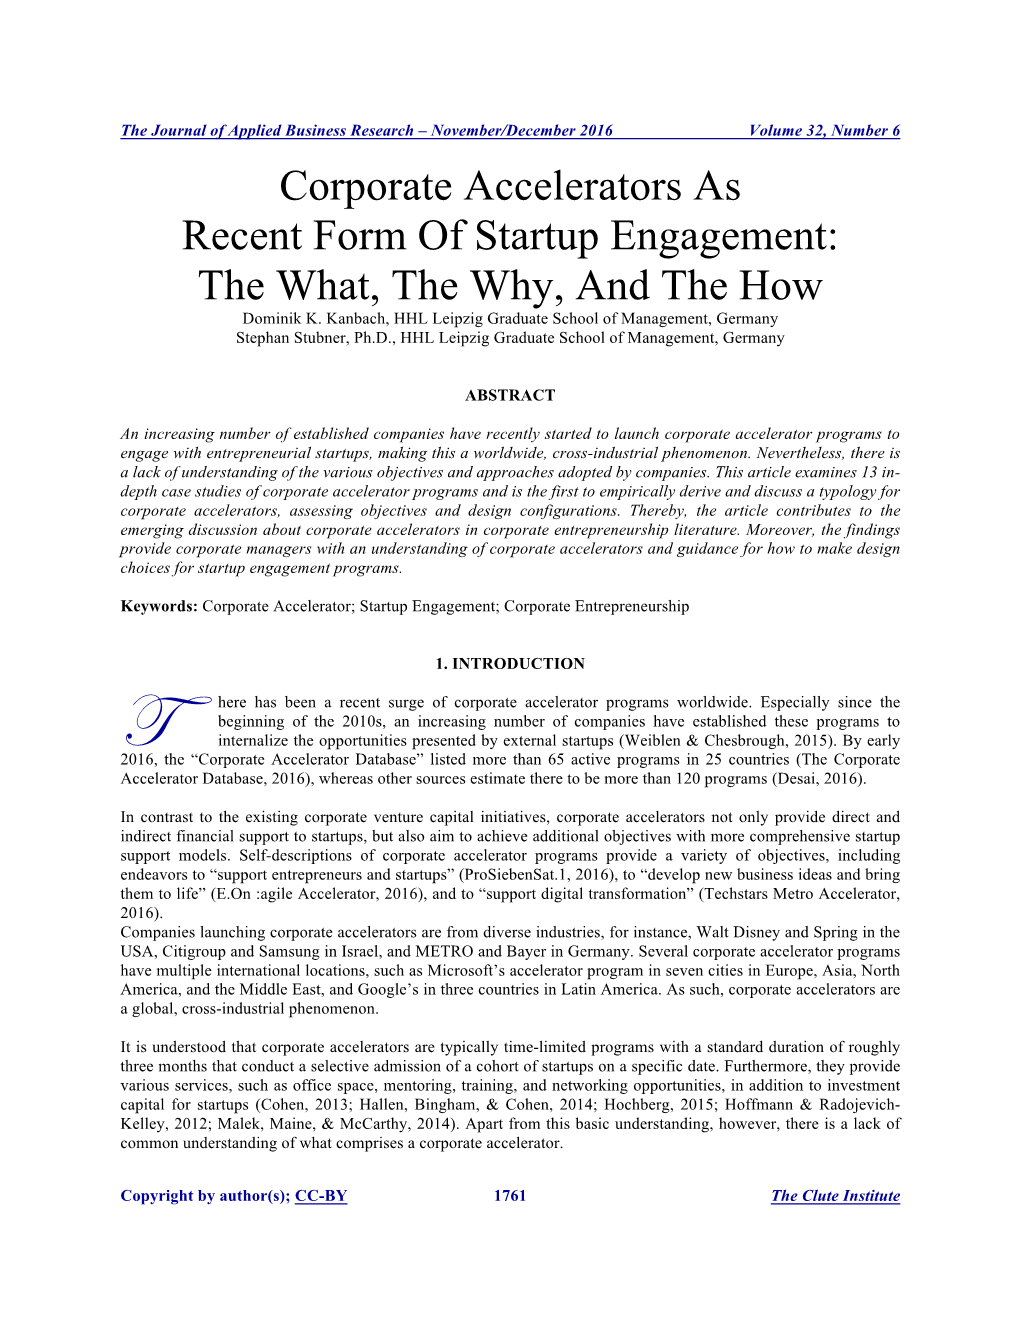 Corporate Accelerators As Recent Form of Startup Engagement: the What, the Why, and the How Dominik K